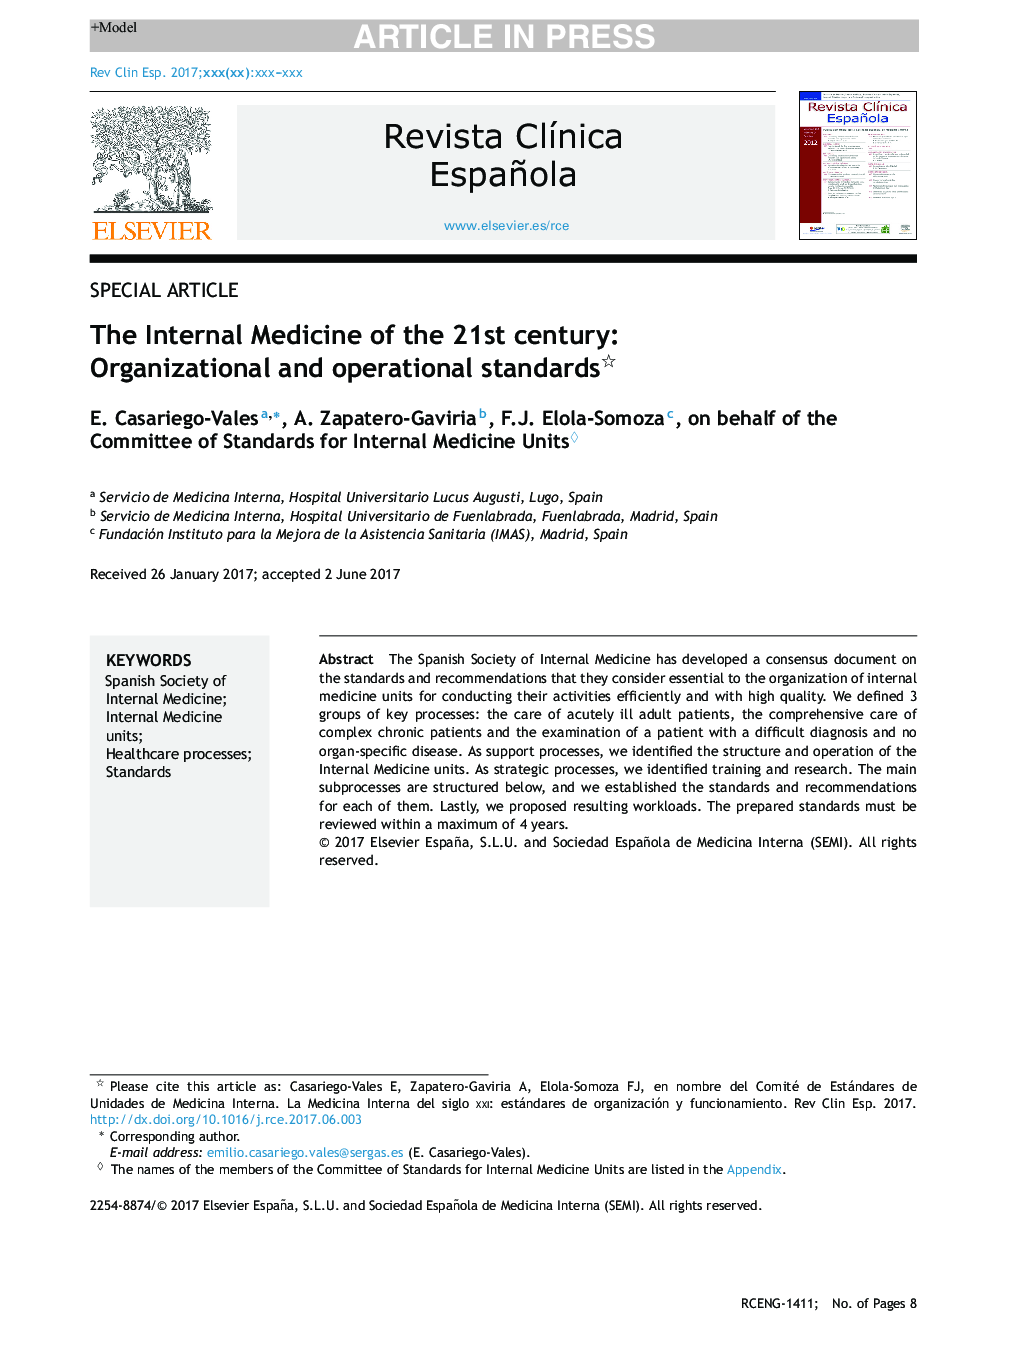 The Internal Medicine of the 21st century: Organizational and operational standards